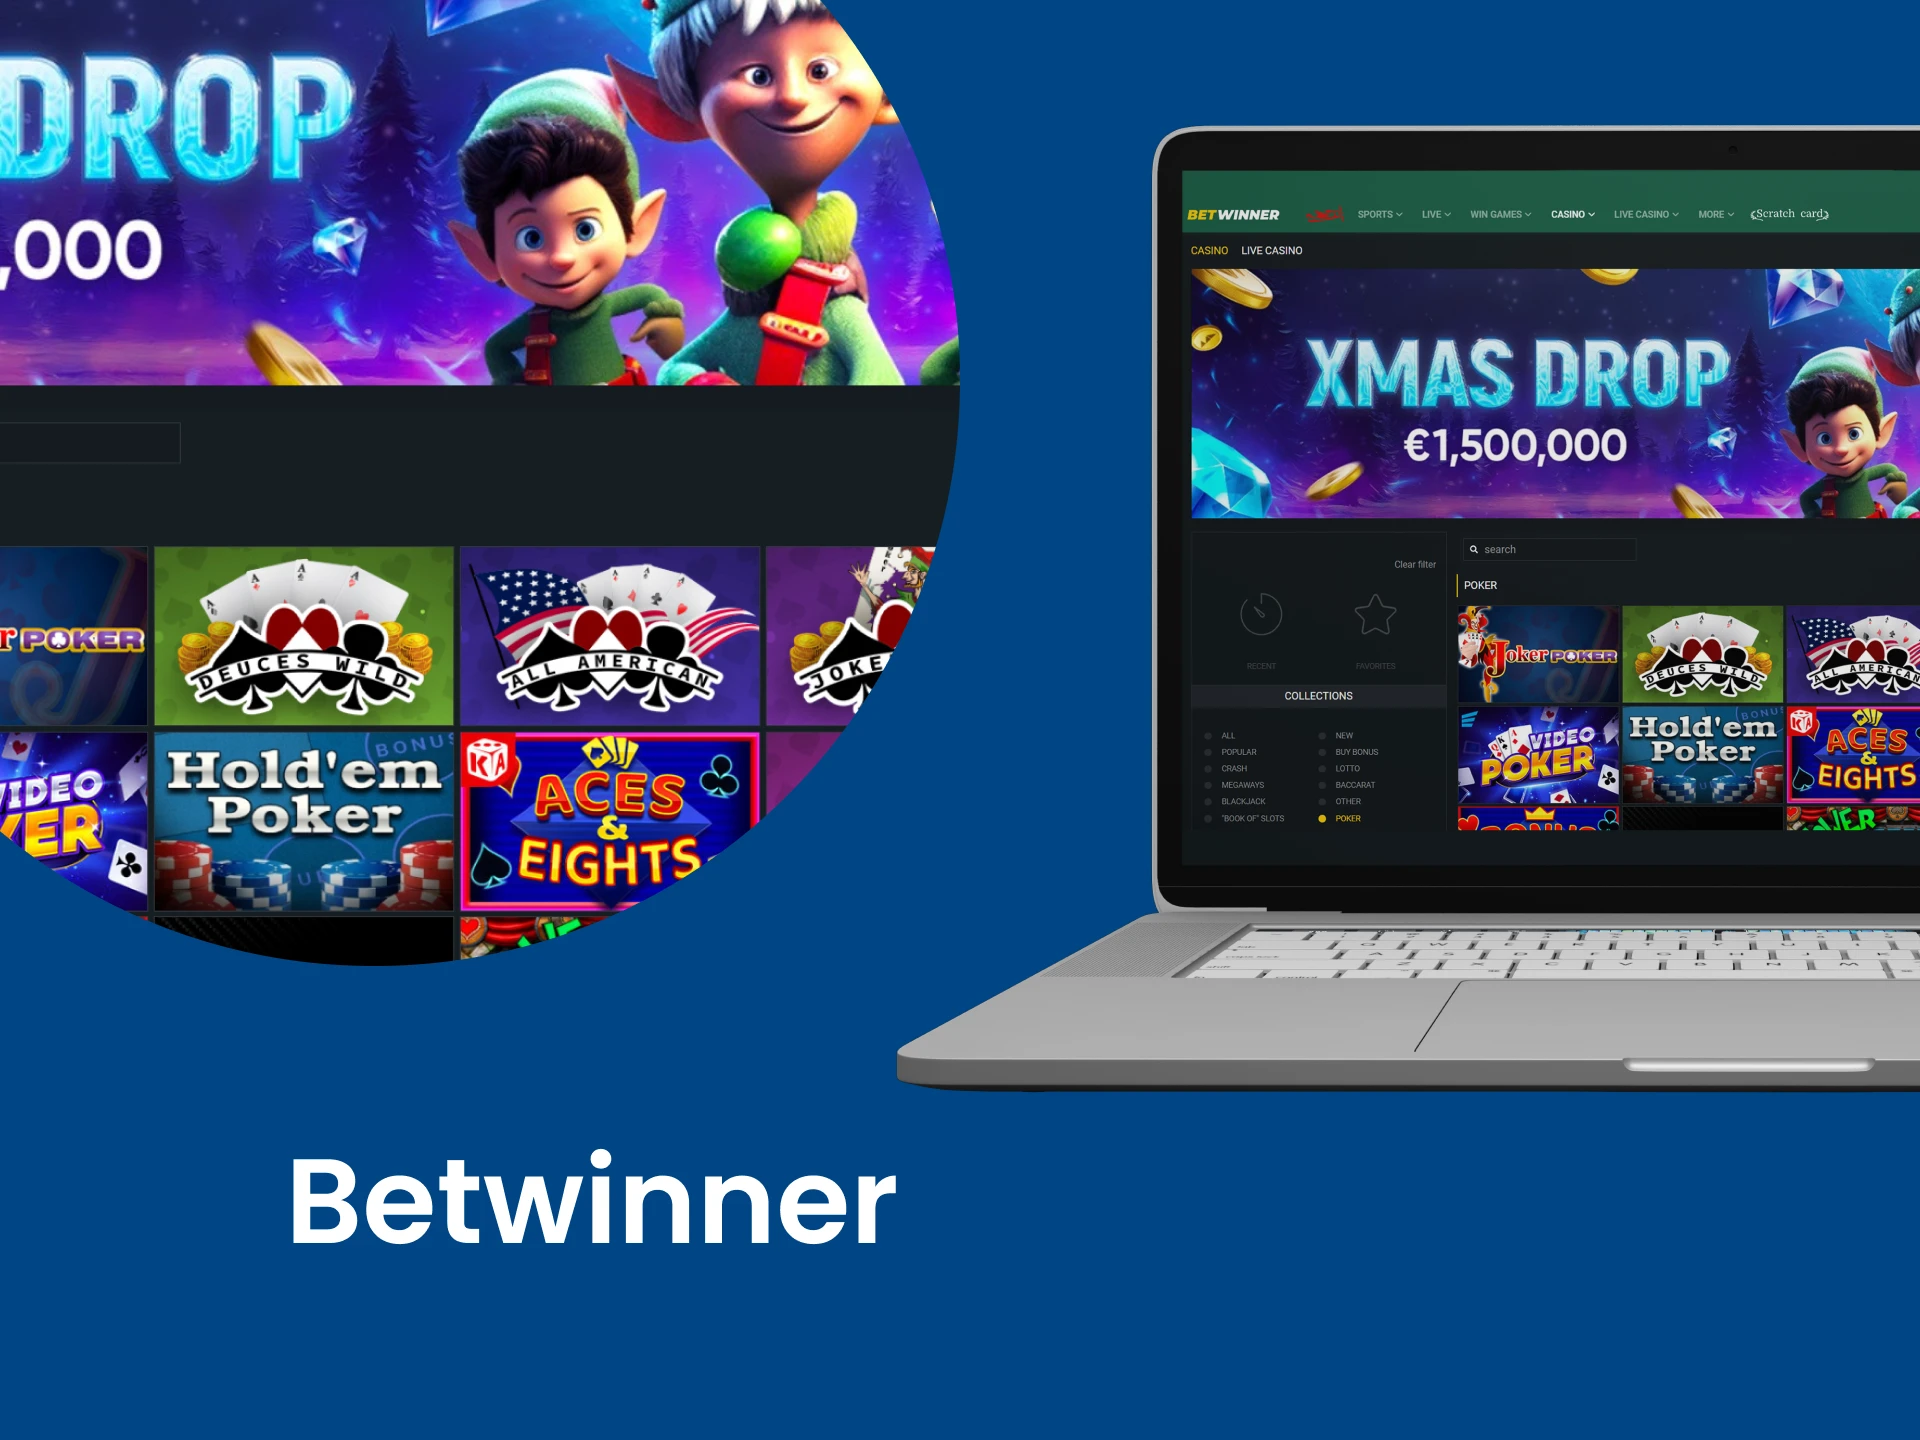 Play Video Poker on the Betwinner service.